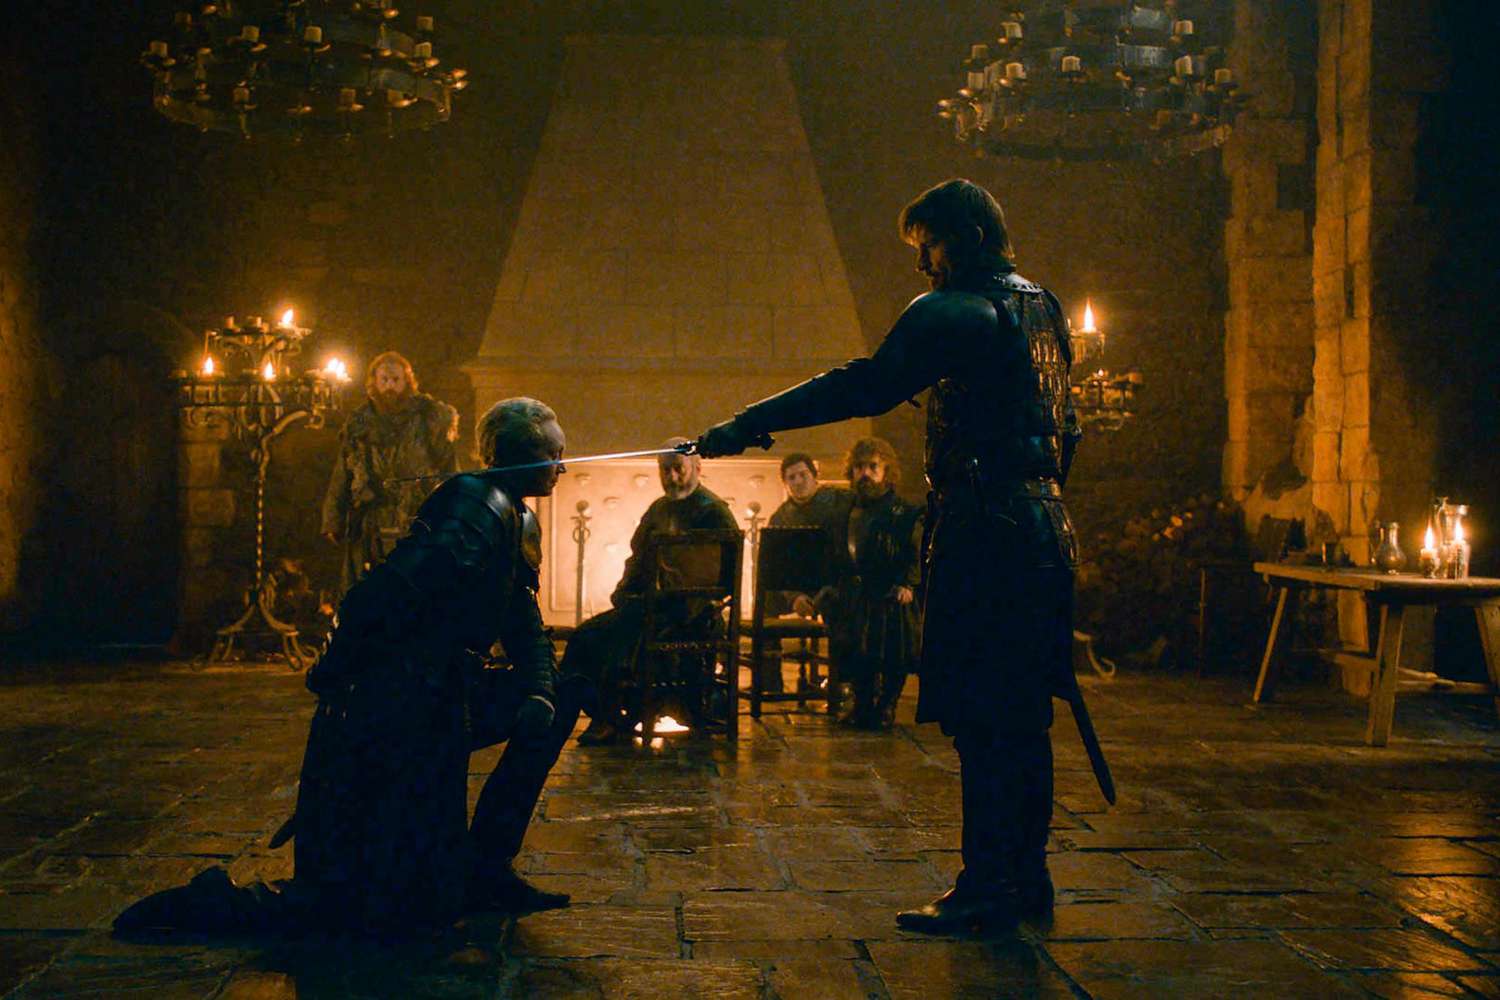 DISHONORABLE MENTION: Jaime and Brienne